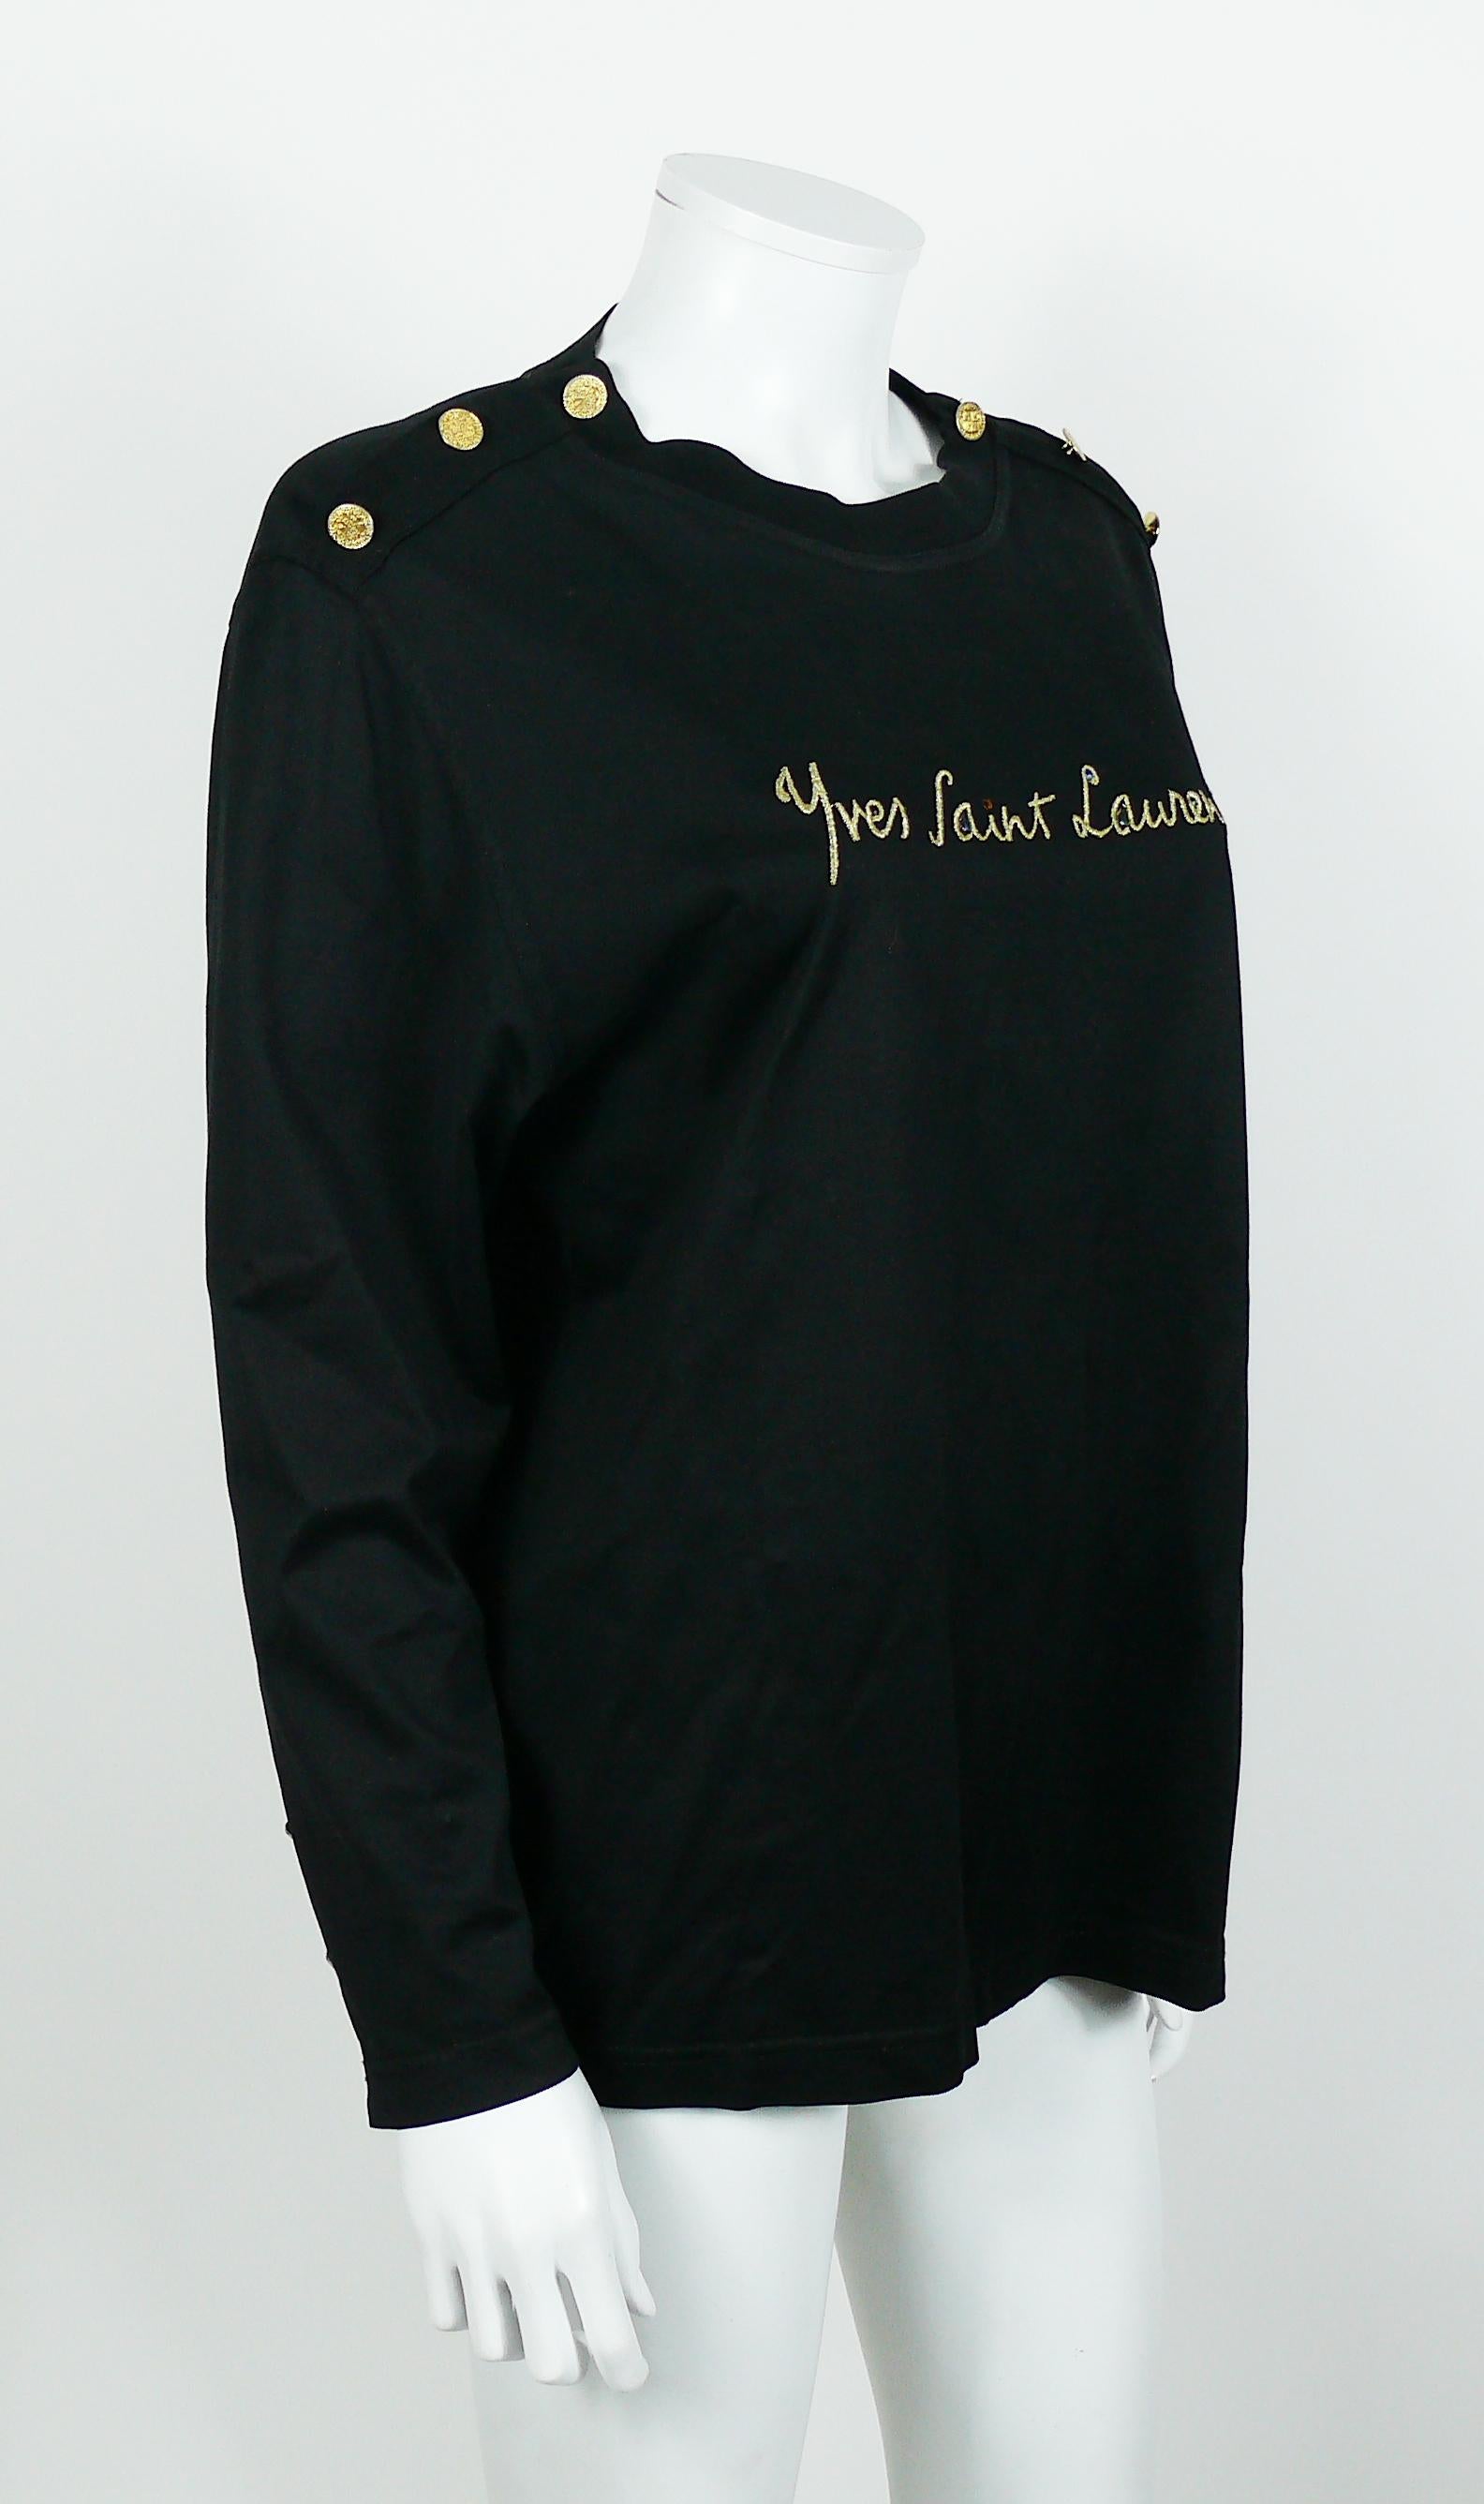 Yves Saint Laurent Variation vintage black top featuring a gold embroidered cursive signature embellished with multicolored resin crystals.

Coat of arms gold toned buttons on shoulders and cuffs.

Label reads YVES SAINT LAURENT VARIATION.

Size